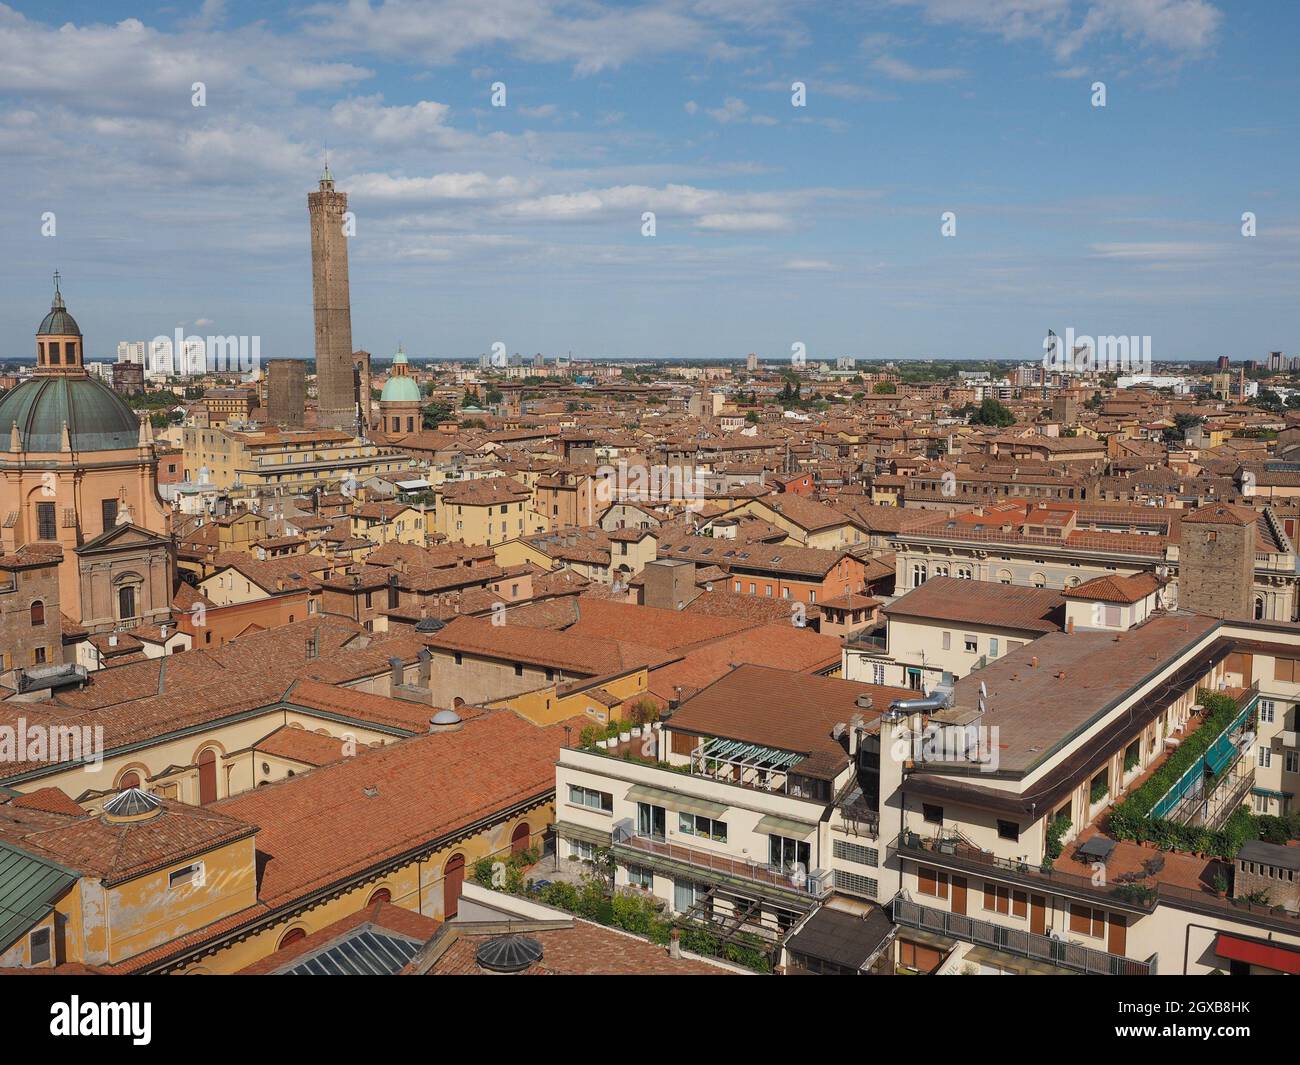 Aerial view of the city of Bologna, Italy. Stock Photo